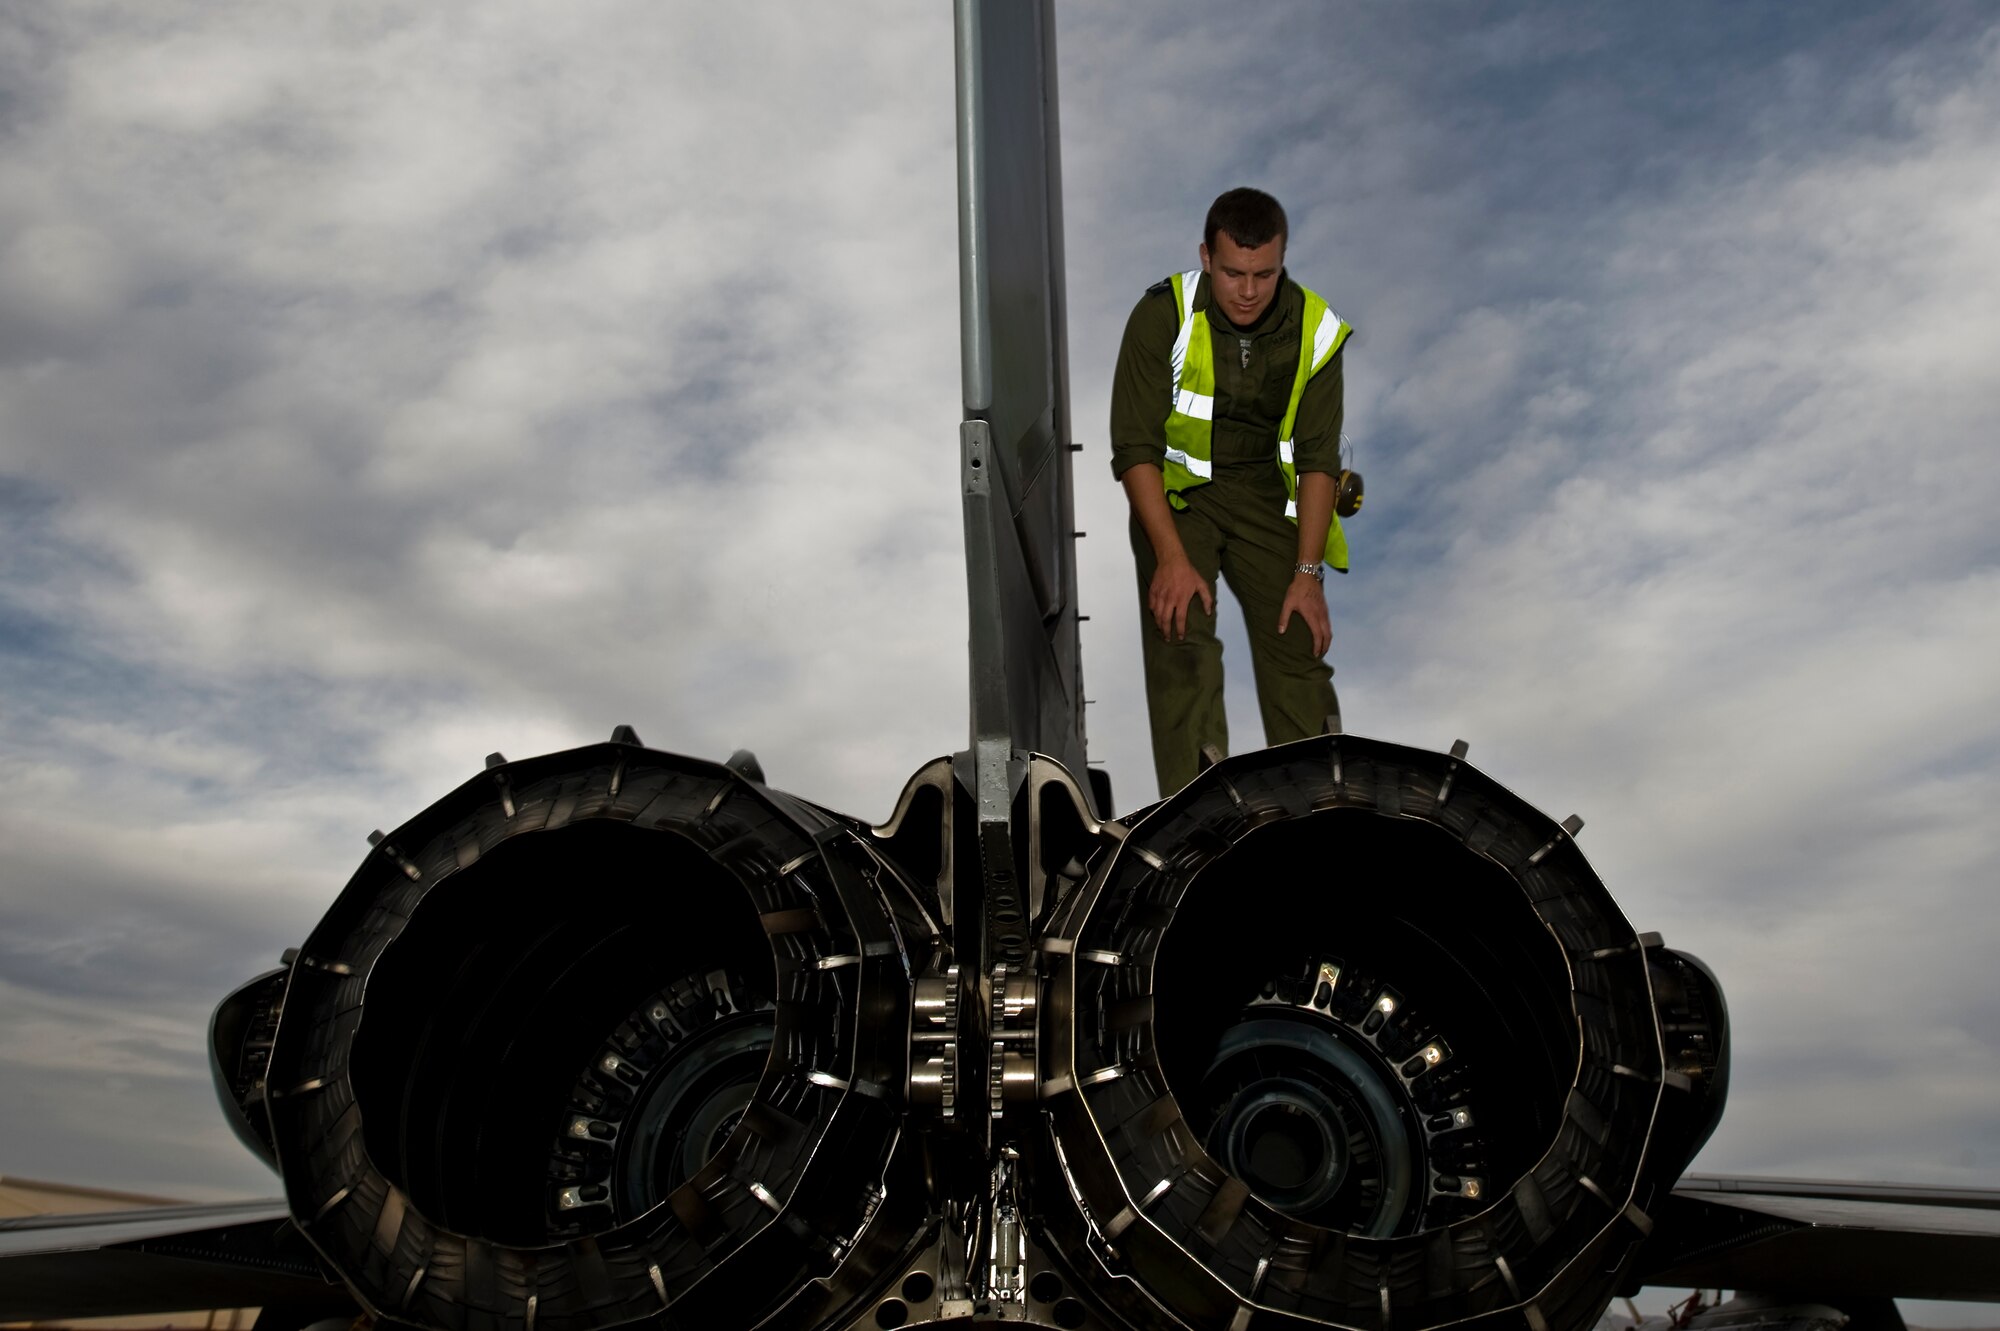 Royal Air Force of the United Kingdom Senior Aircraftsman Daniel Mumford, 2nd Army Cooperation Squadron, engineer, RAF Marham, checks over a GR4 Tornado, during Red Flag 12-3 March 5, 2012, at Nellis Air Force Base, Nev. Red Flag is a realistic combat training exercise involving the air forces of the United States and its allies.(U.S. Air Force photo by Airman 1st Class Daniel Hughes)